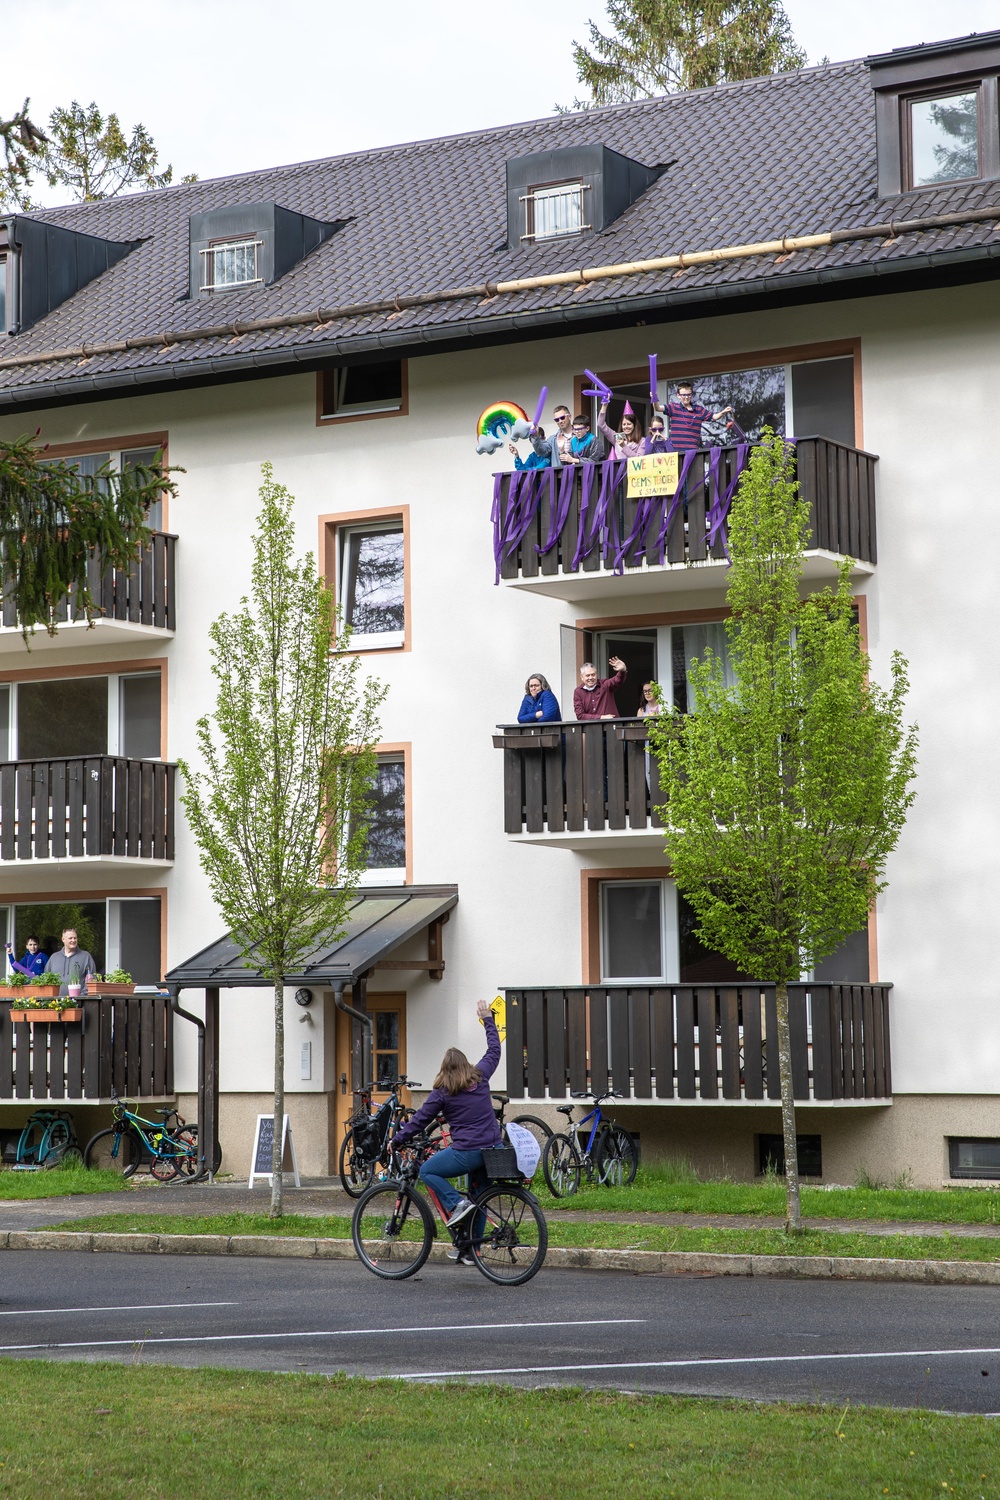 Month of the Military Child brings Purple Parade to Garmisch